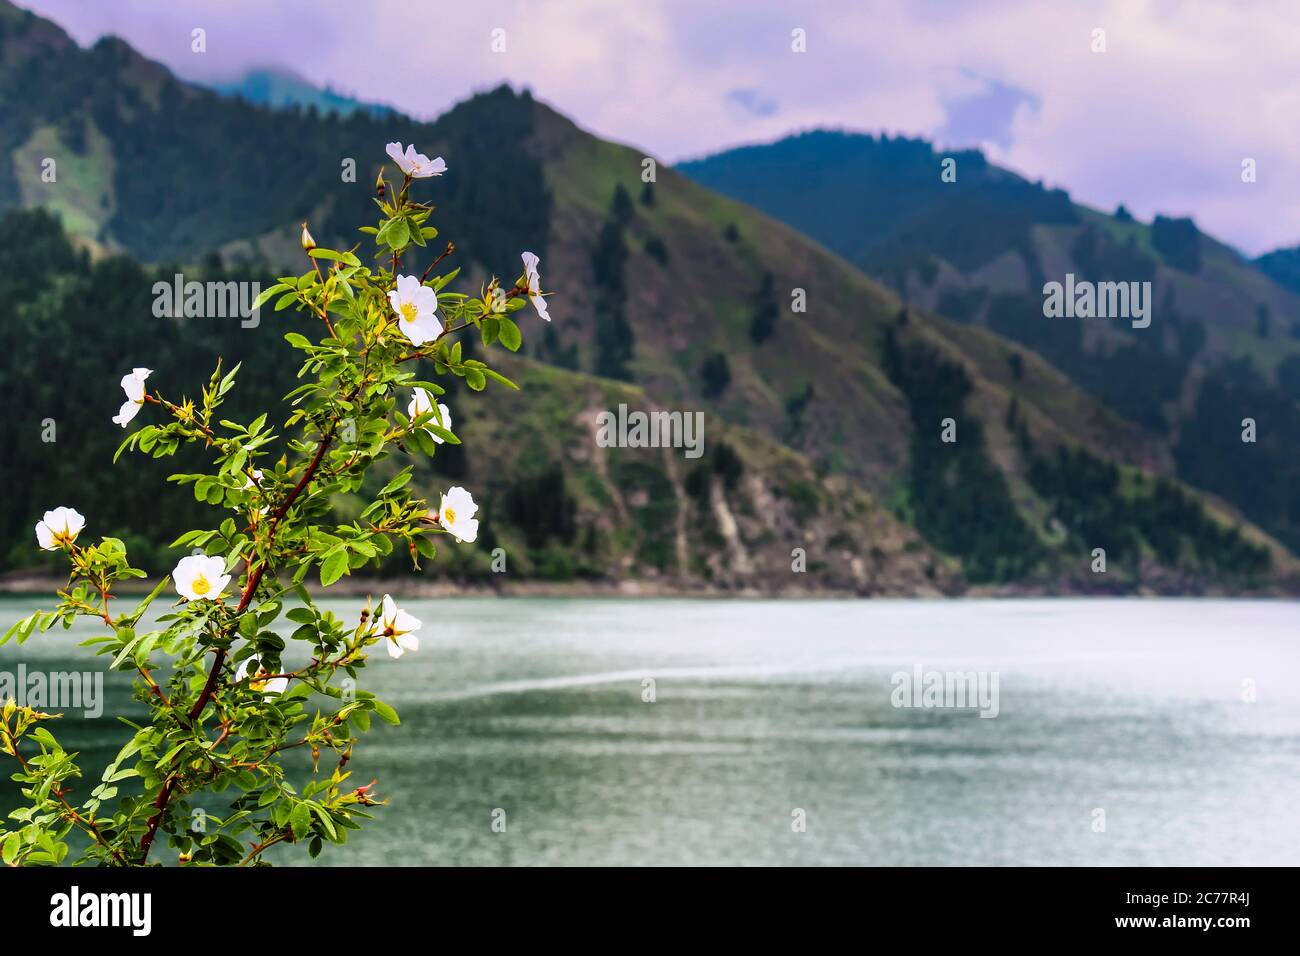 White alpine poppy flowers growing at the banks of Tianchi Lake in Xinjiang, China Stock Photo